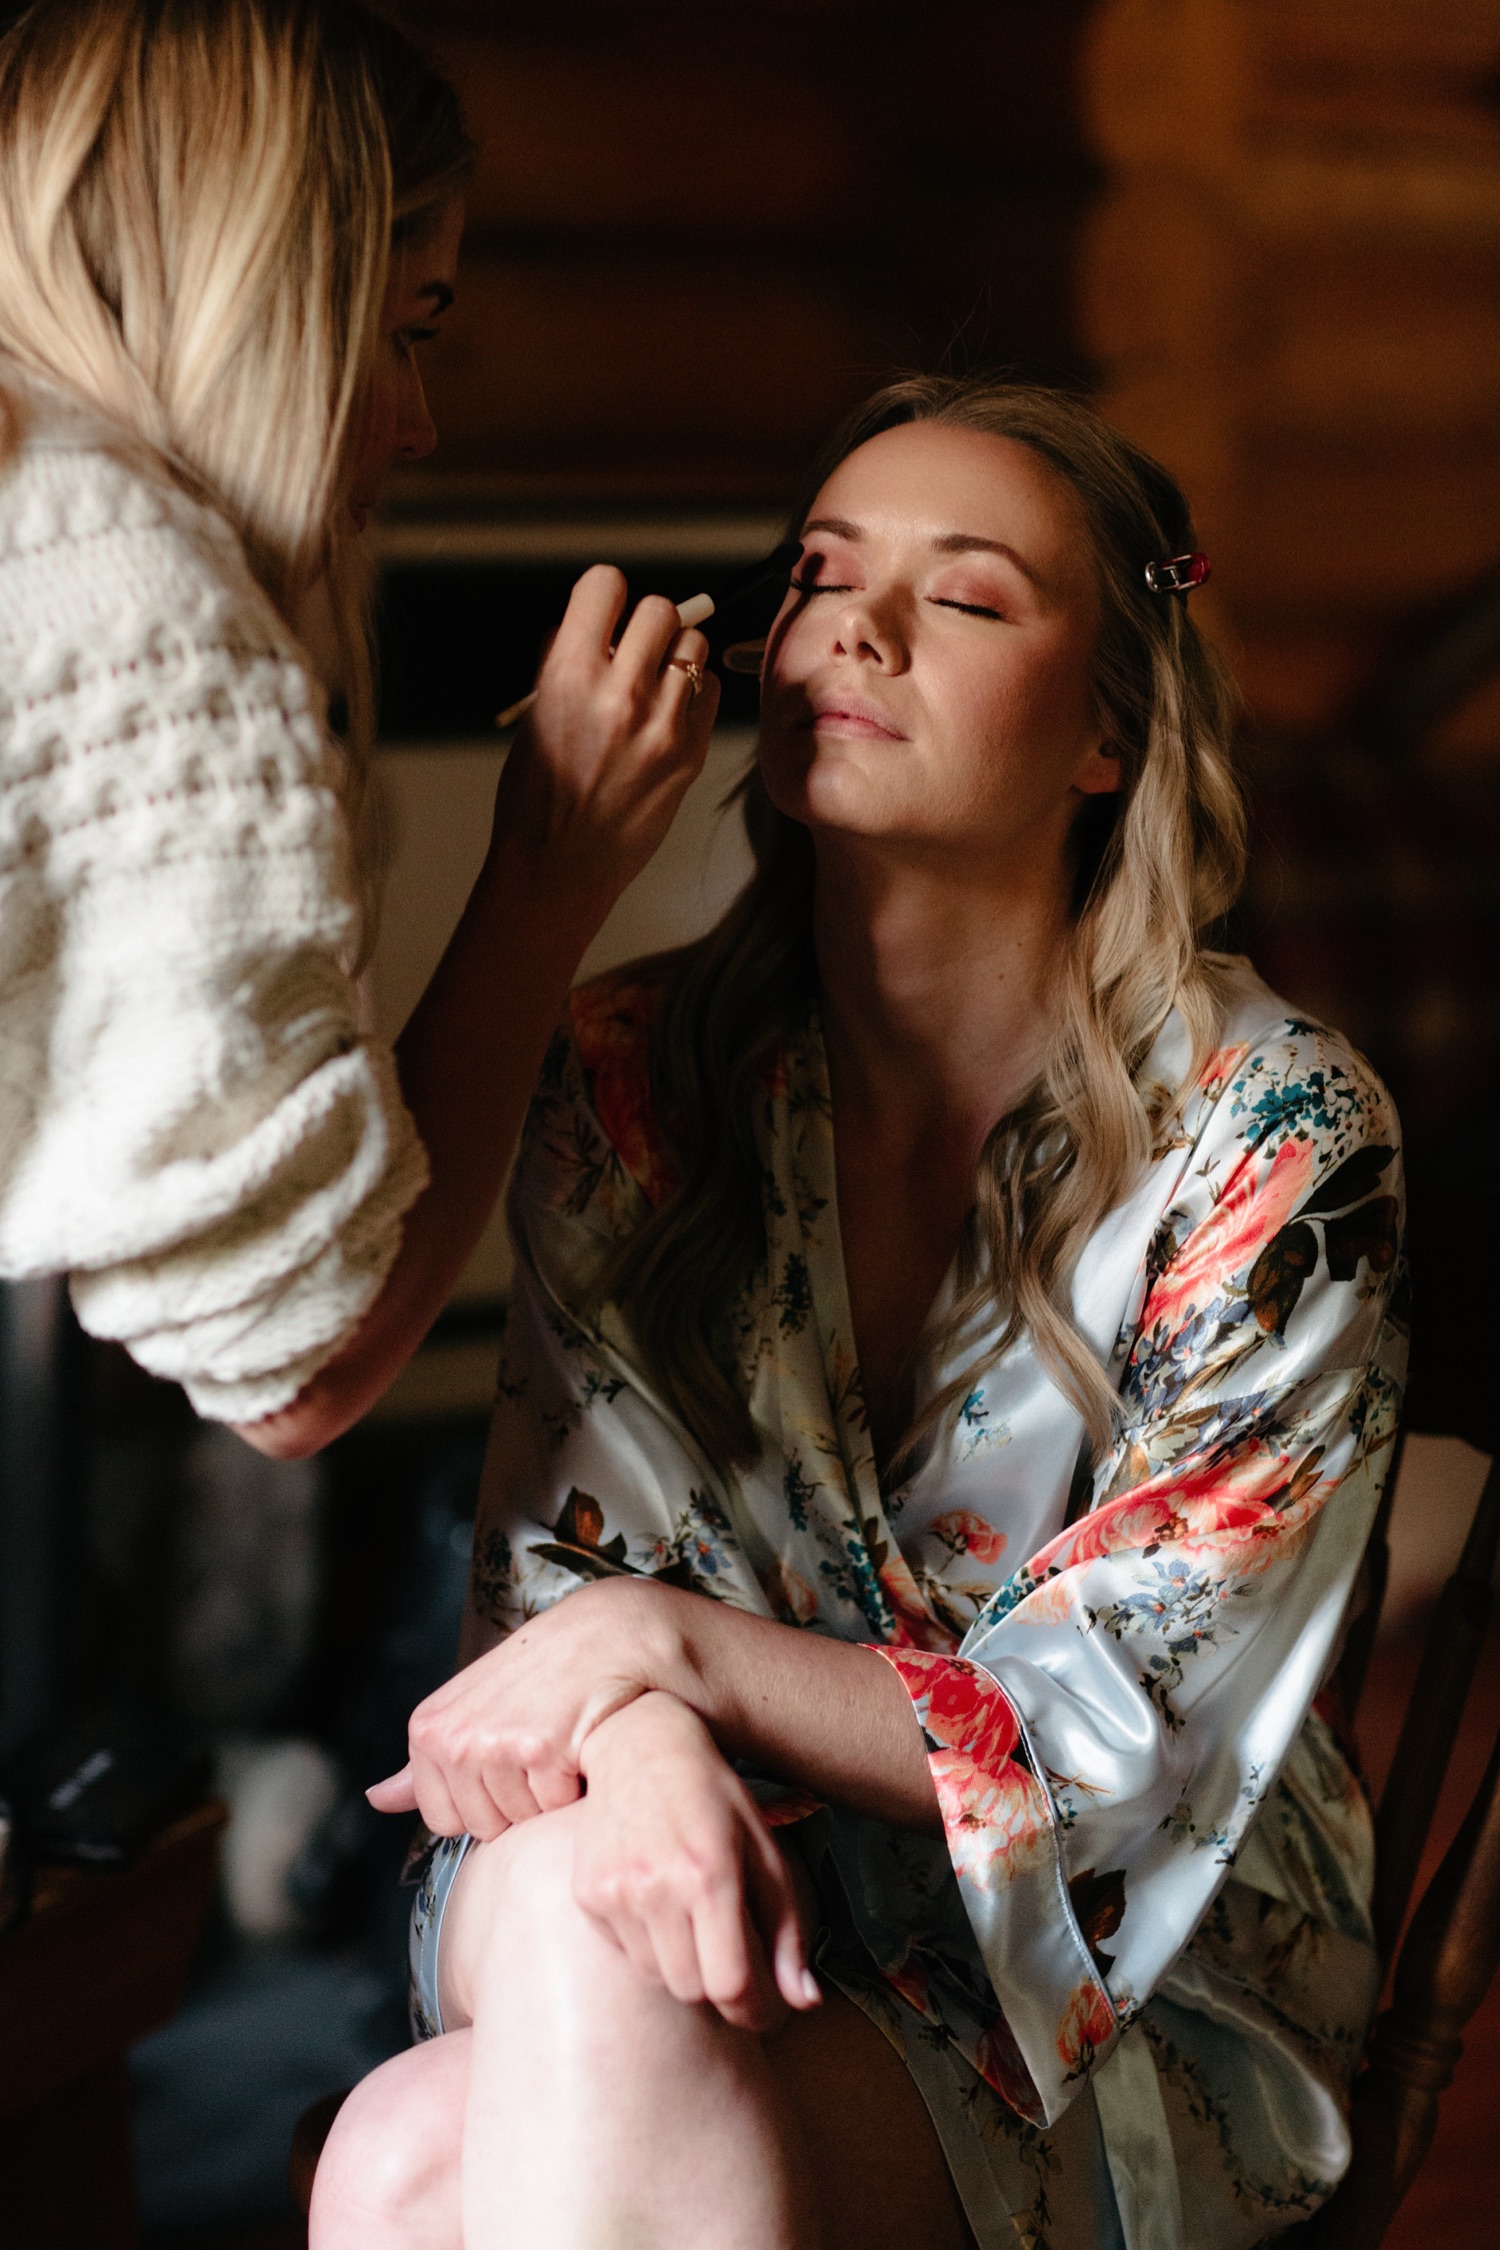 Simply Me Hair and Makeup at Cathedral Mountain Lodge doing final makeup touchups